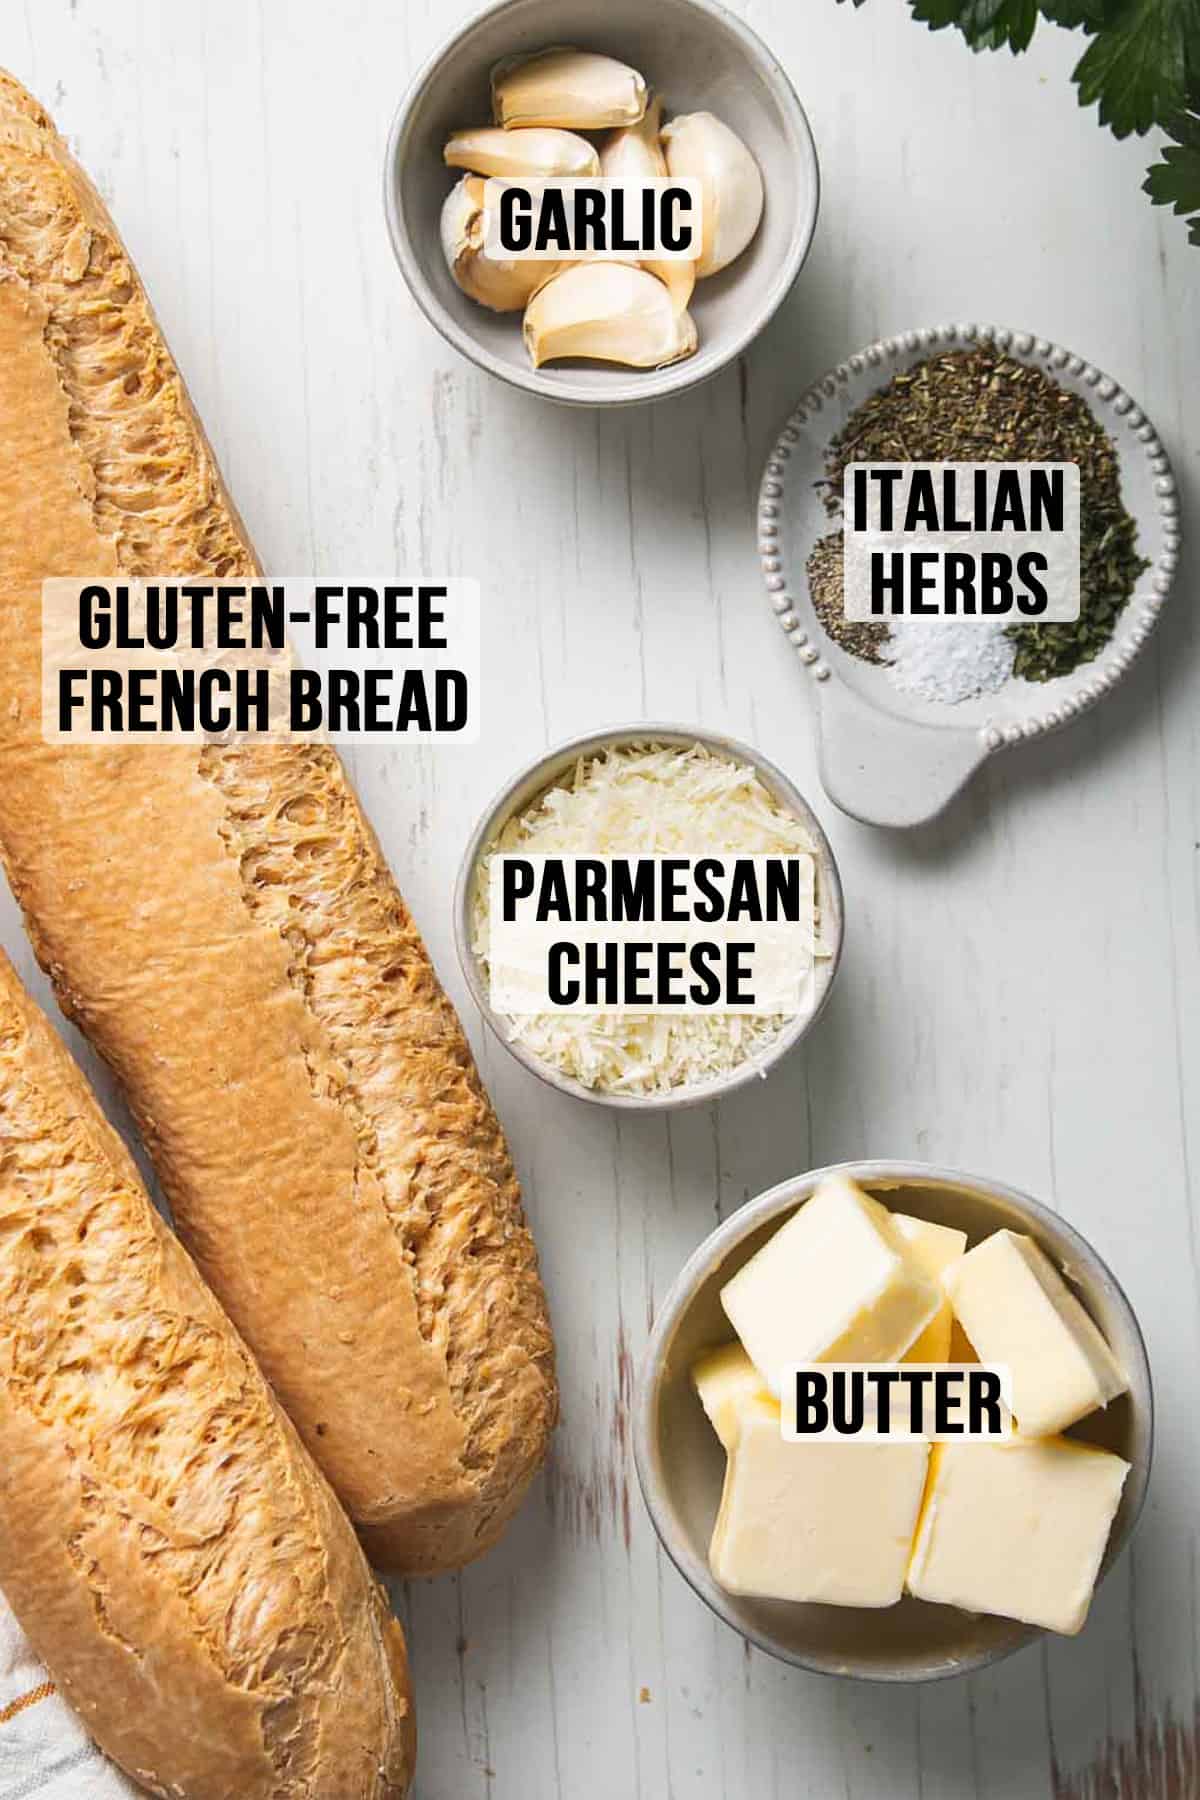 Ingredients for gluten-free garlic bread measured out in bowls.